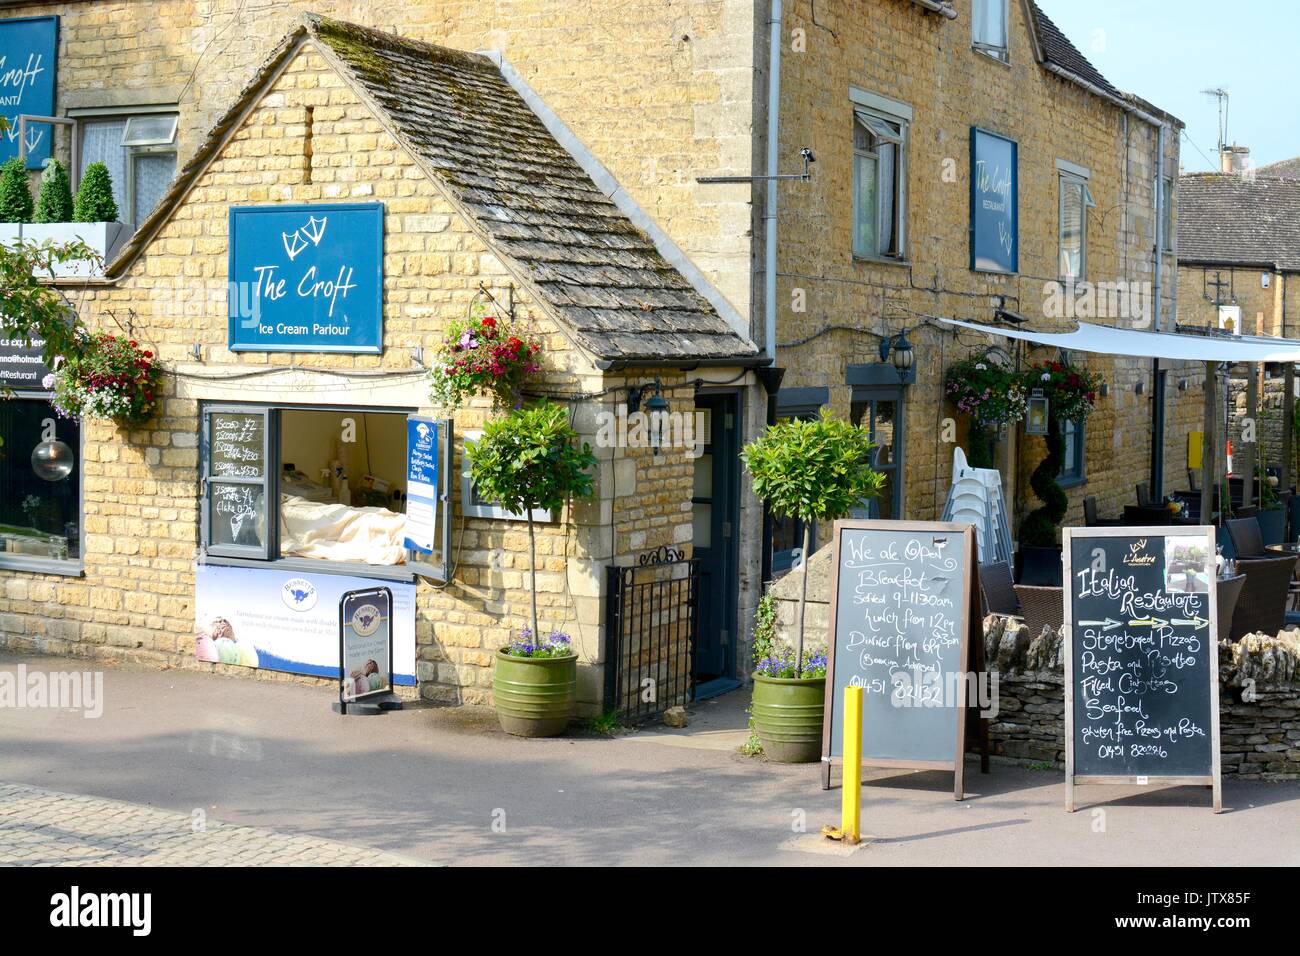 The Croft restaurant in the cotswold village of Bourton-on-the-Water, Gloucestershire,England, UK Stock Photo